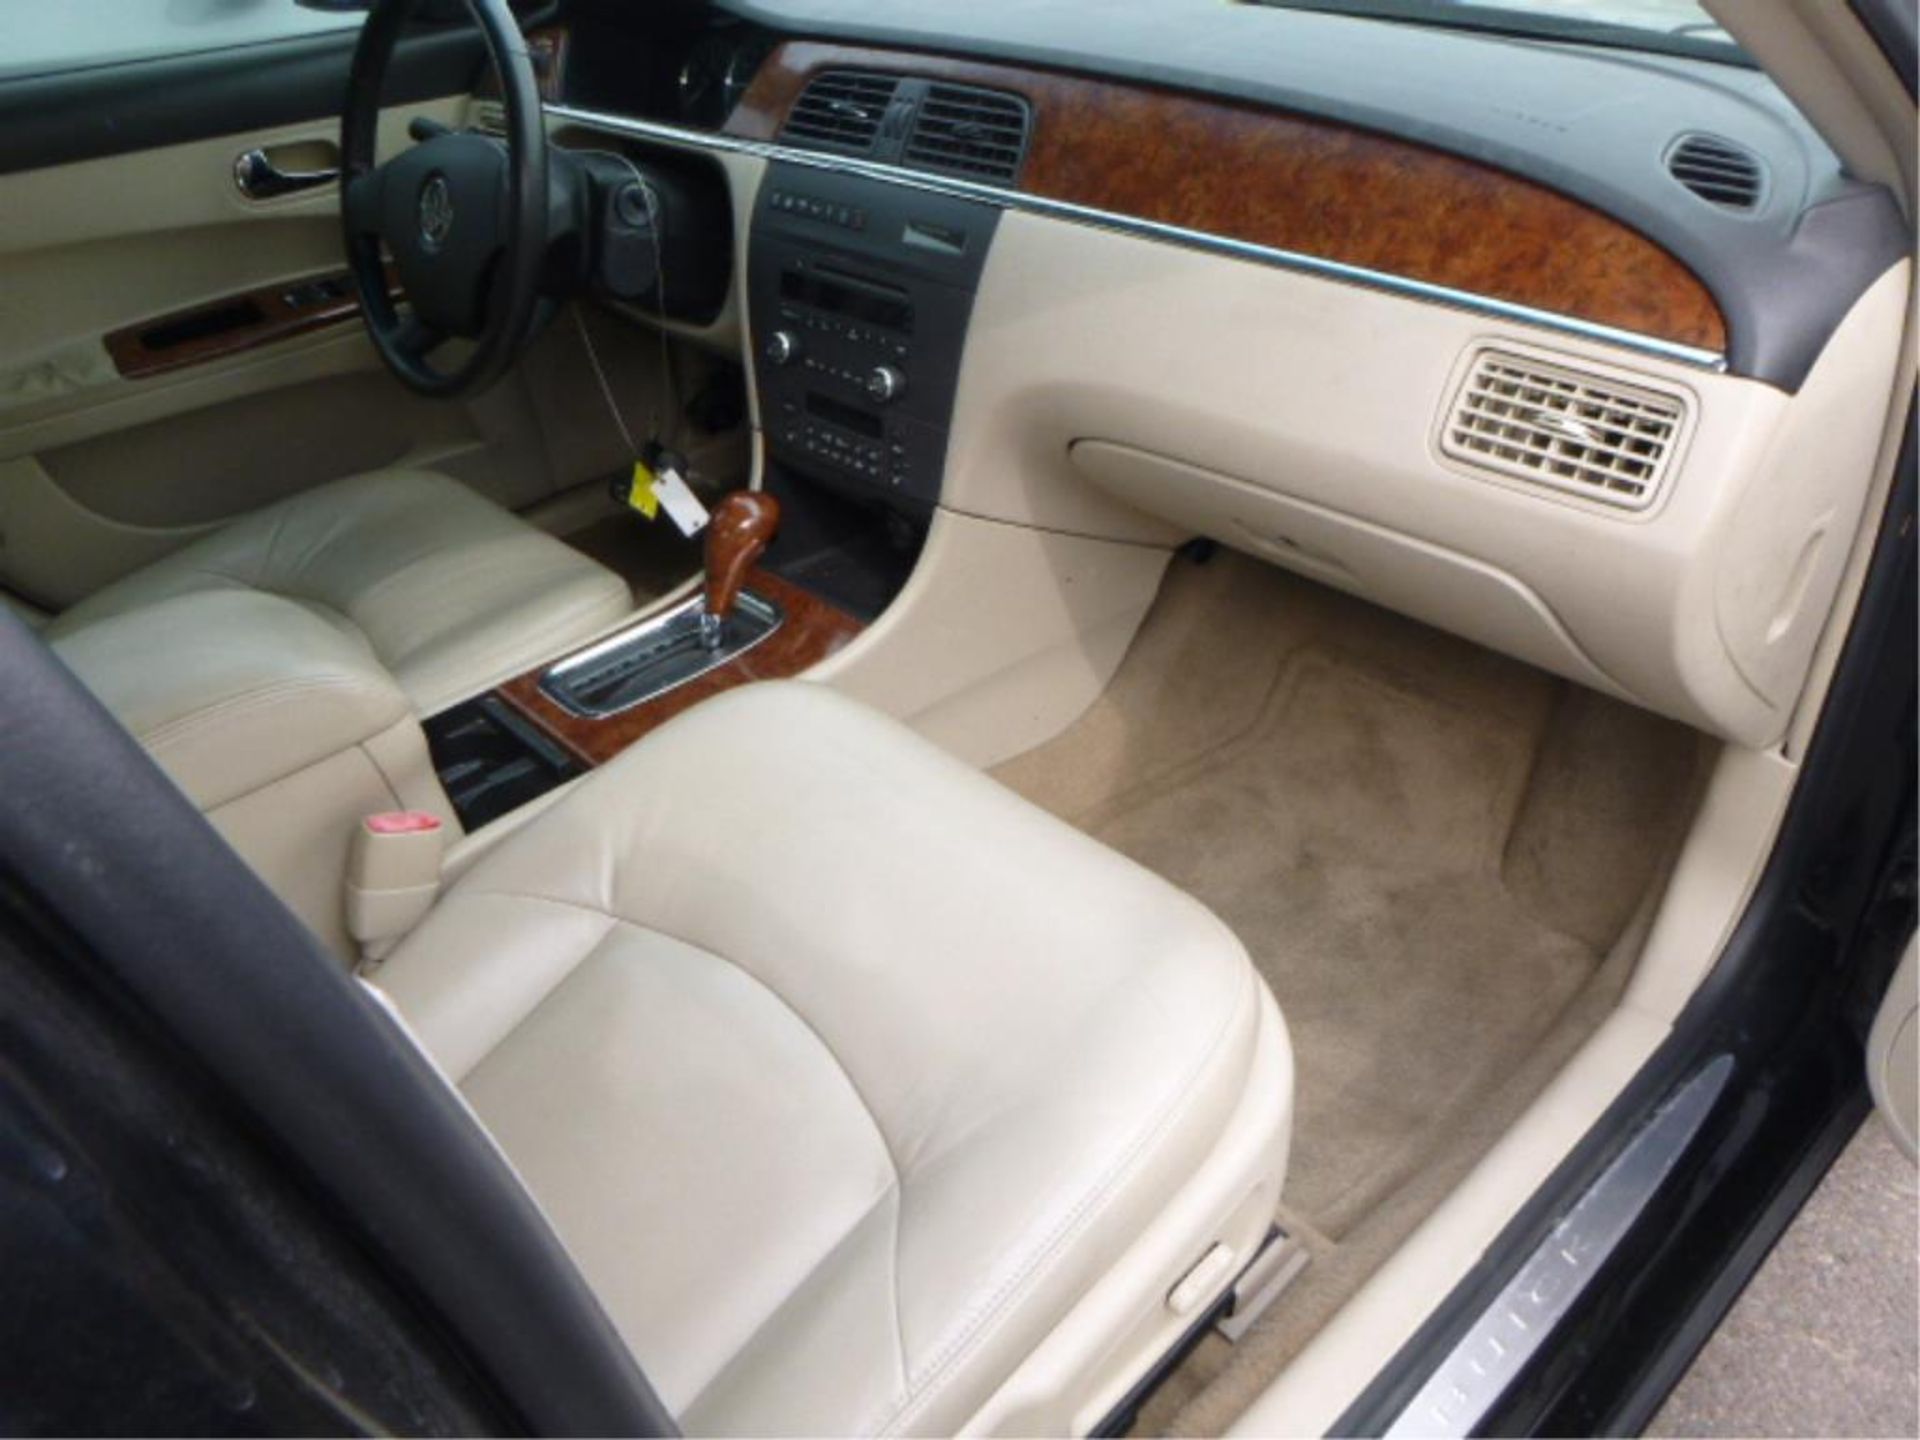 2005 Buick LaCrosse - Image 5 of 10